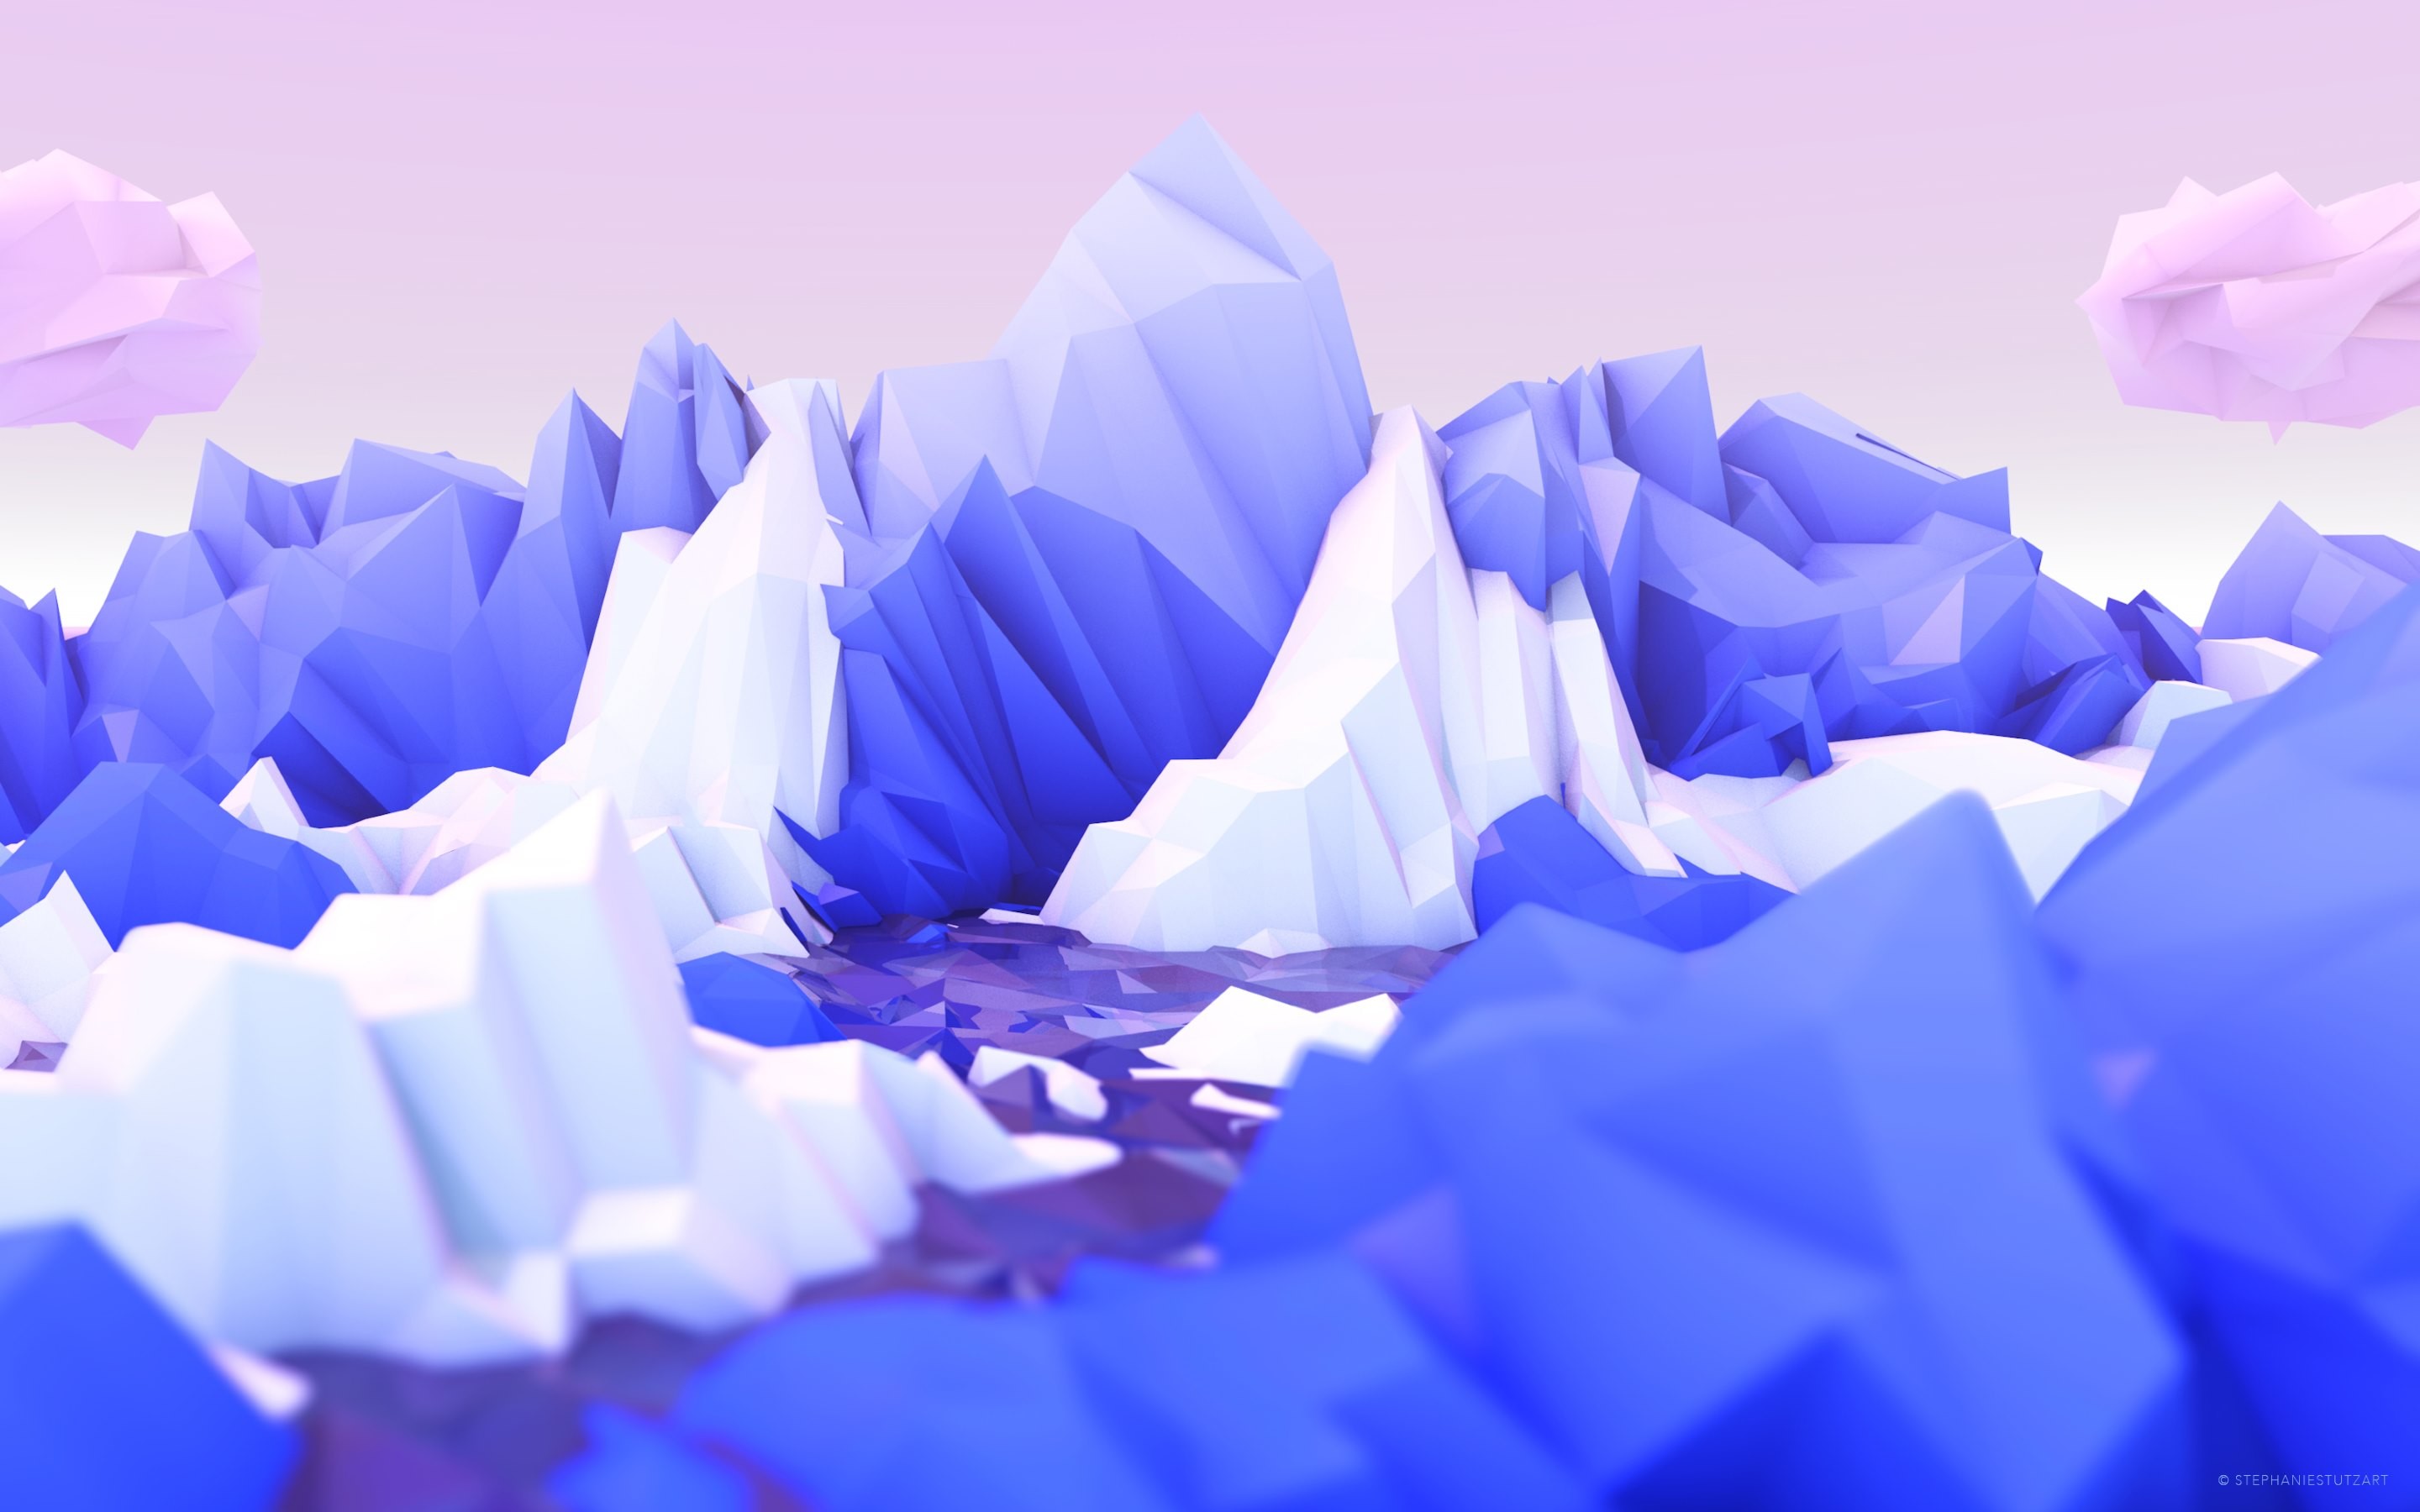 2880x1800 And here's the 2nd low poly art wallpaper from portfolio of the talented  digital artist - Stephanie Stutz Â· With her permission, the wallpaper is  optimized ...